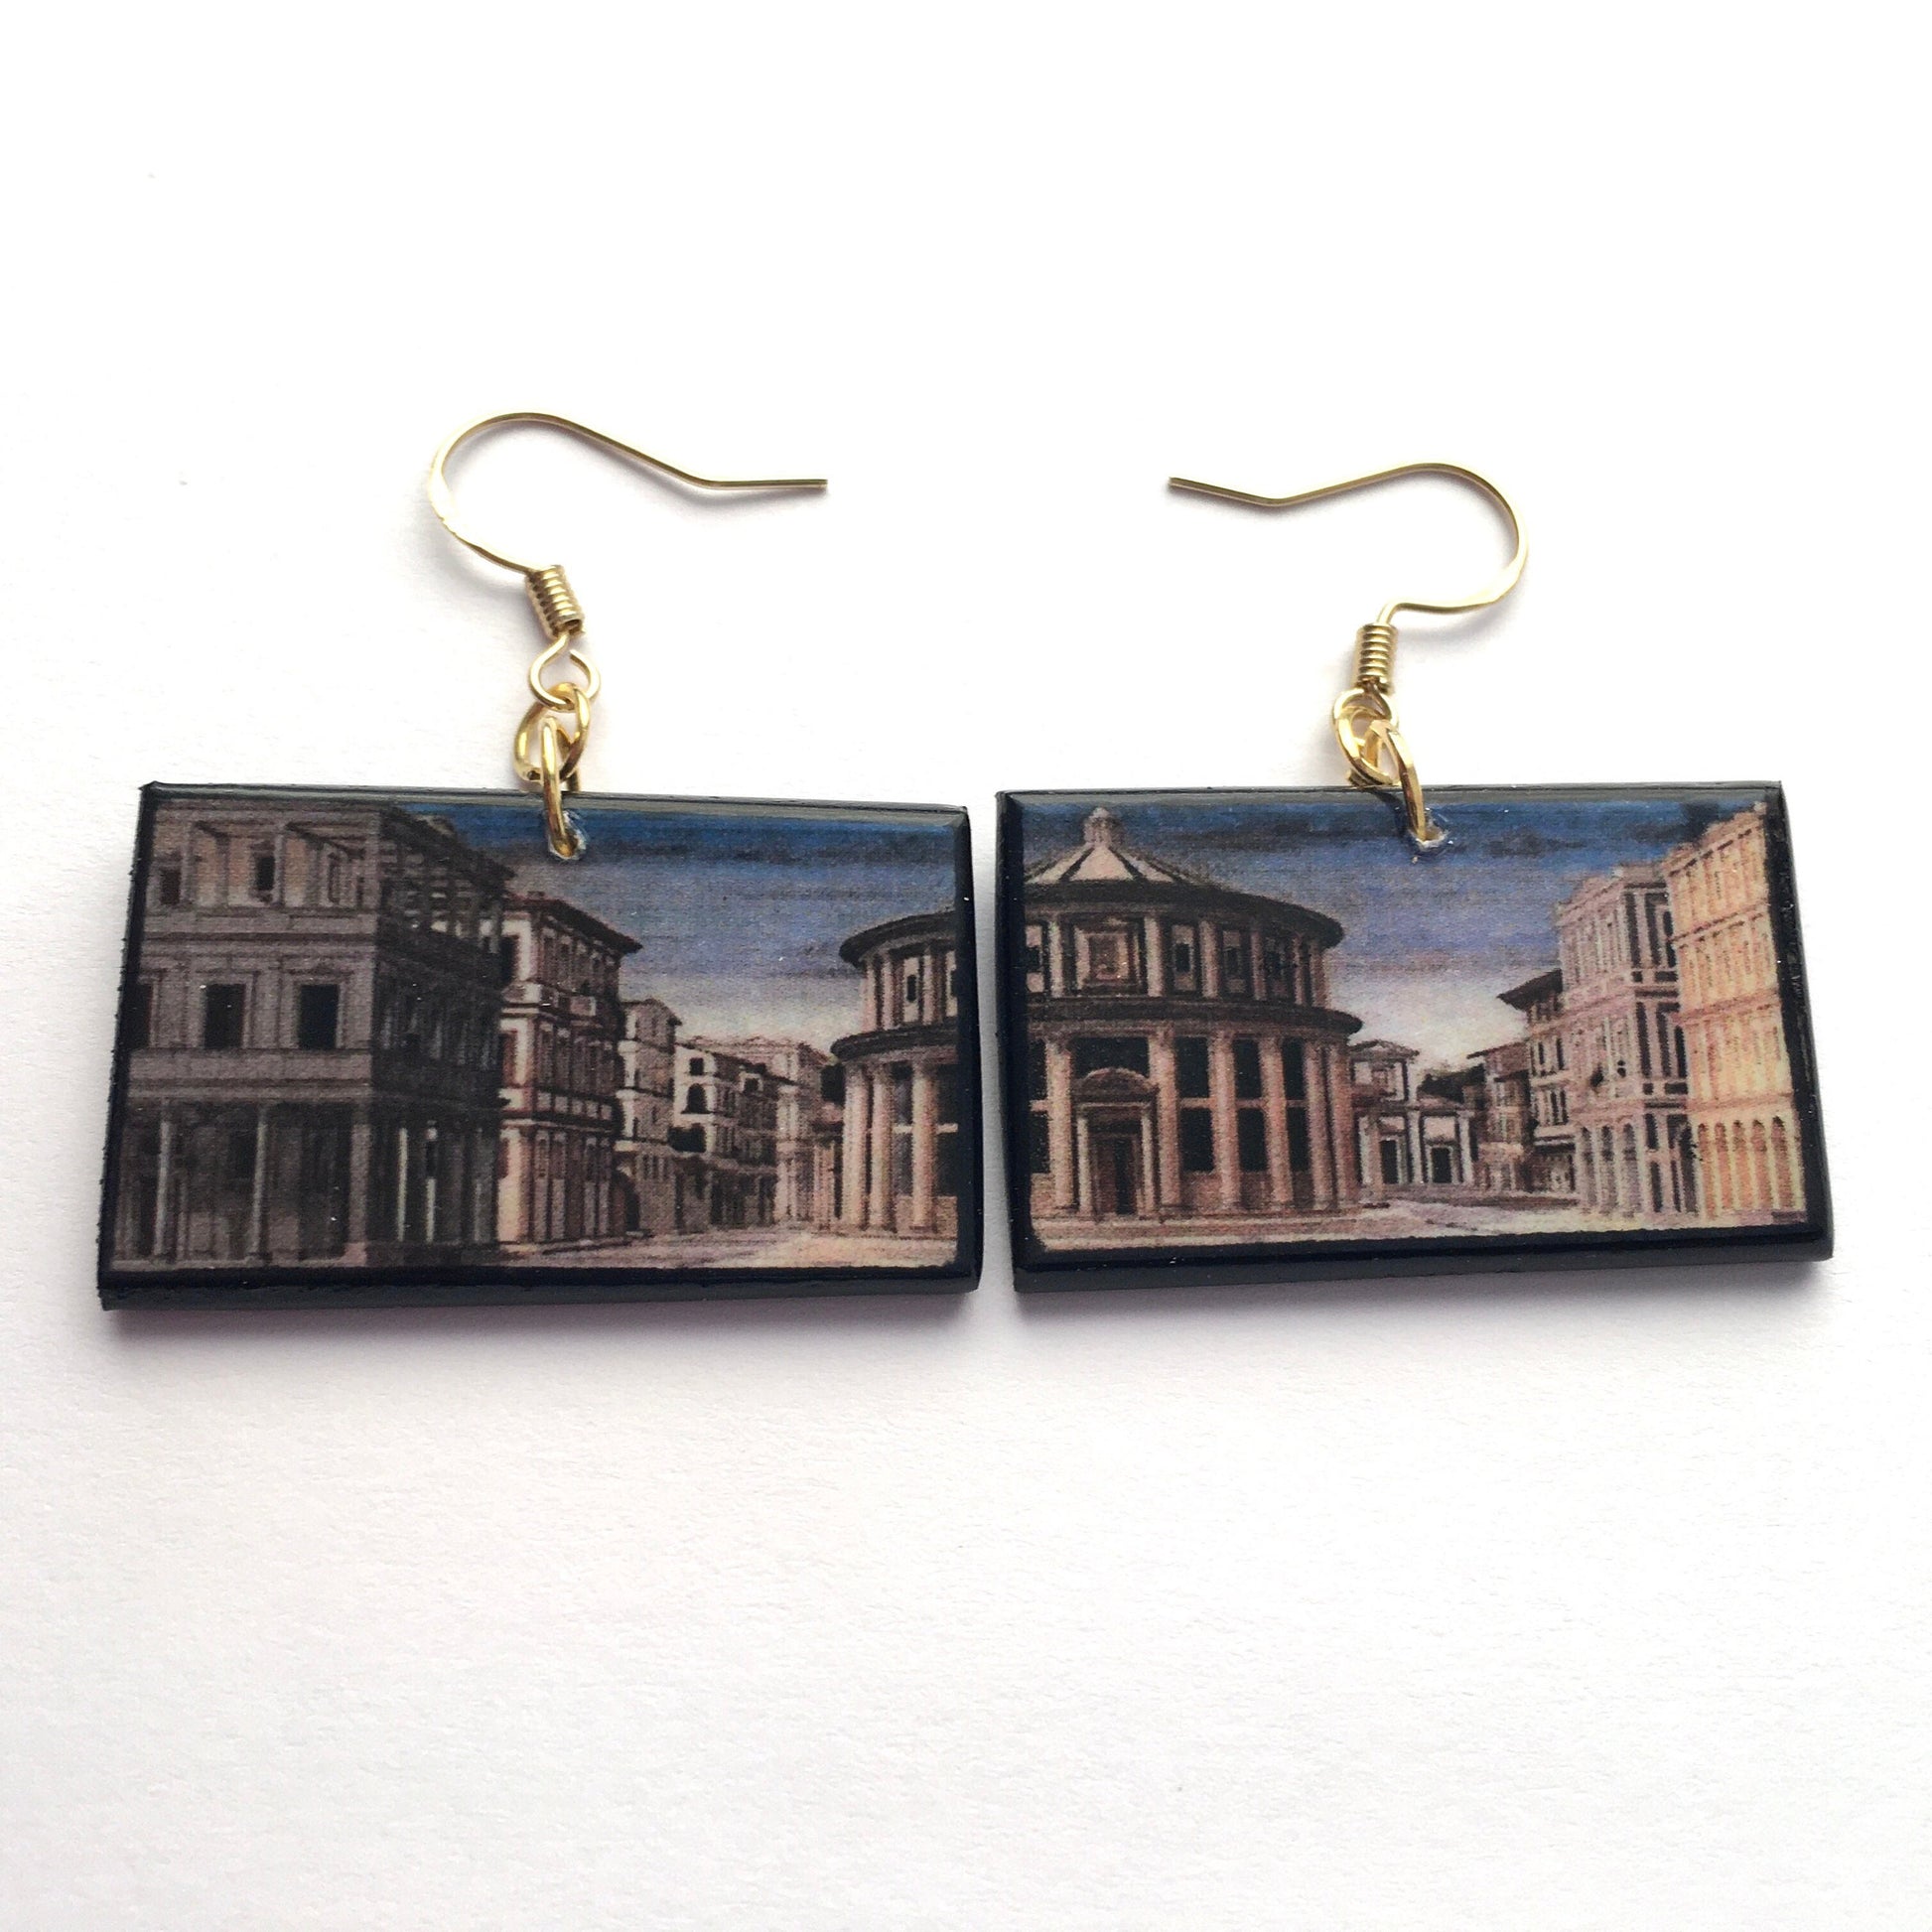 The Ideal City Urbino, statement, mismatched earrings with the prospective of the  city. Renaissance art jewellery by Obljewellery on sustainable wood. Artsy, architect gift.